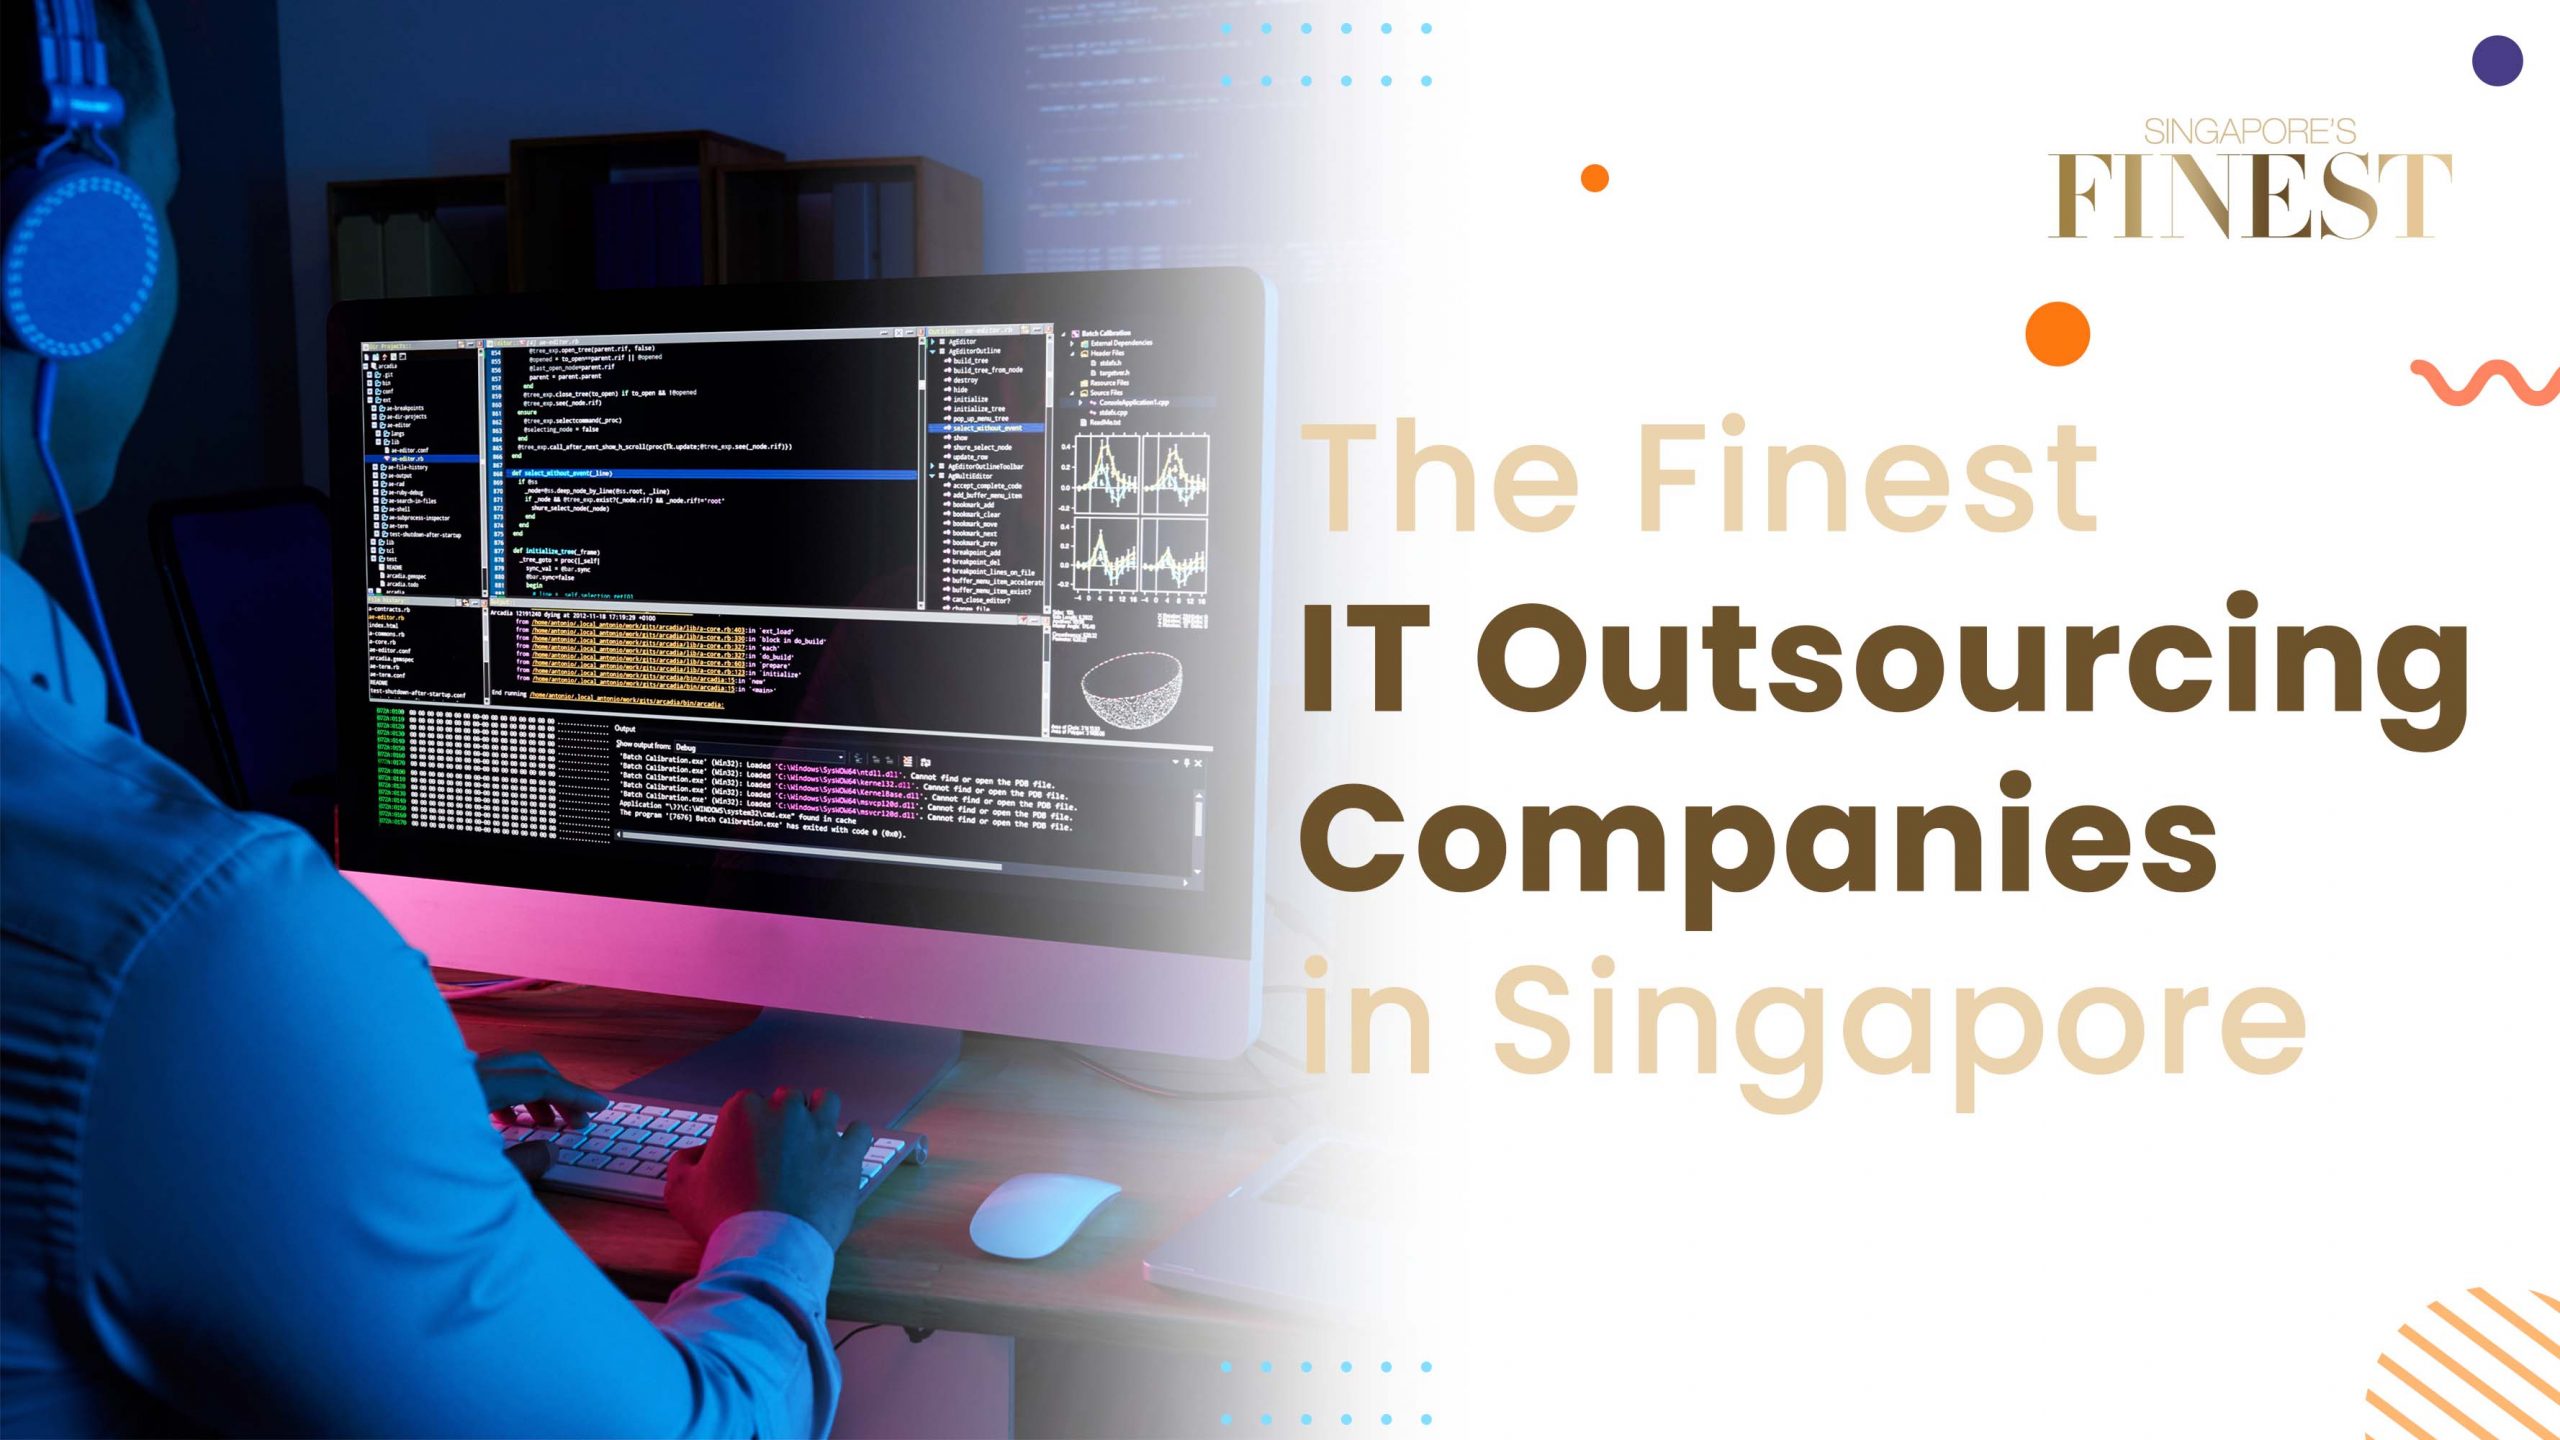 Finest IT Outsourcing Companies in Singapore